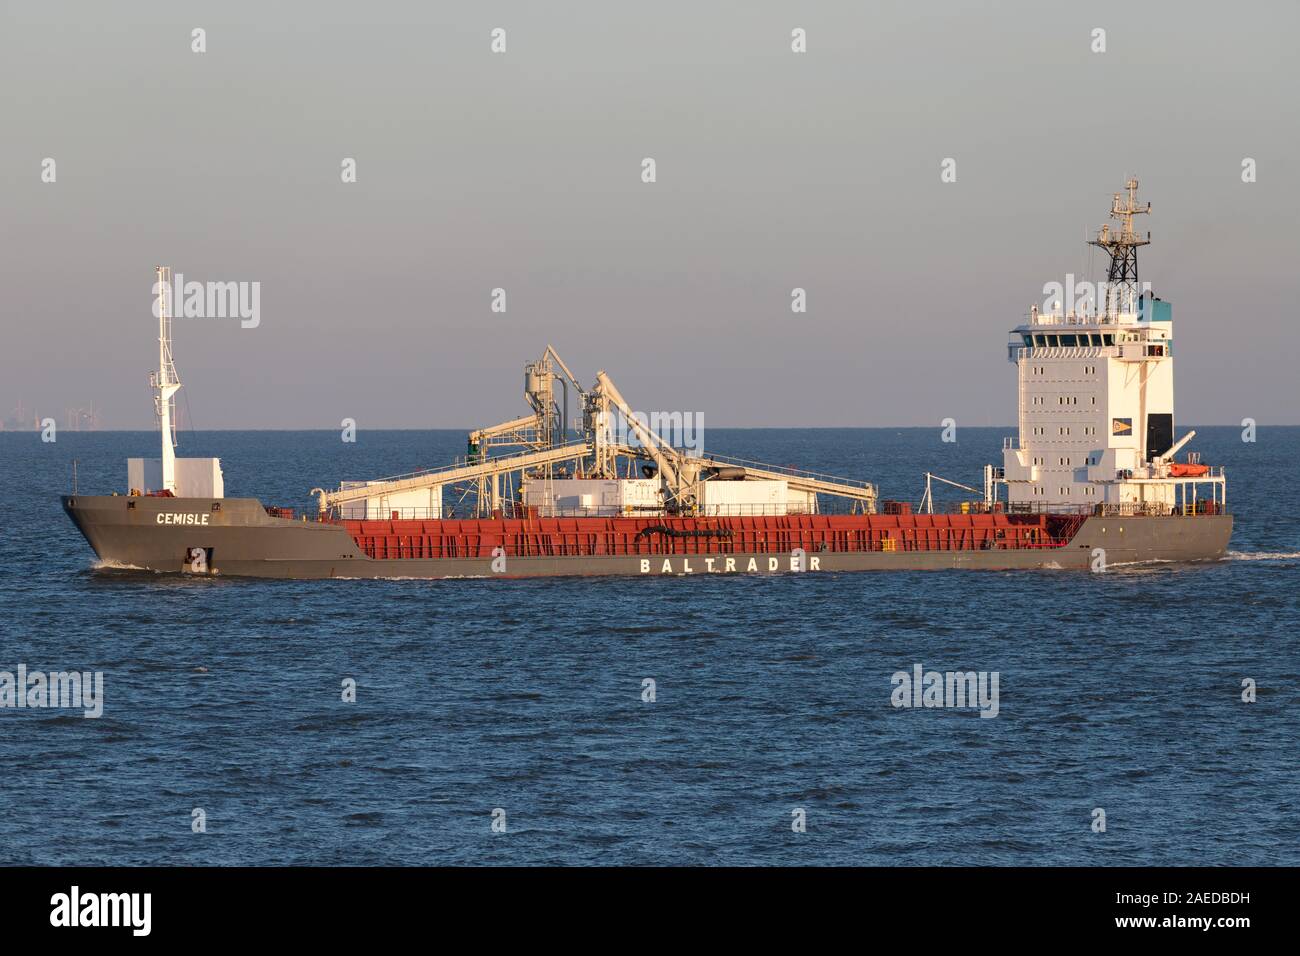 Baltrader cementcarrier CEMISLE with pneumatic and mechanical selfdischarging equipment on the river Elbe Stock Photo